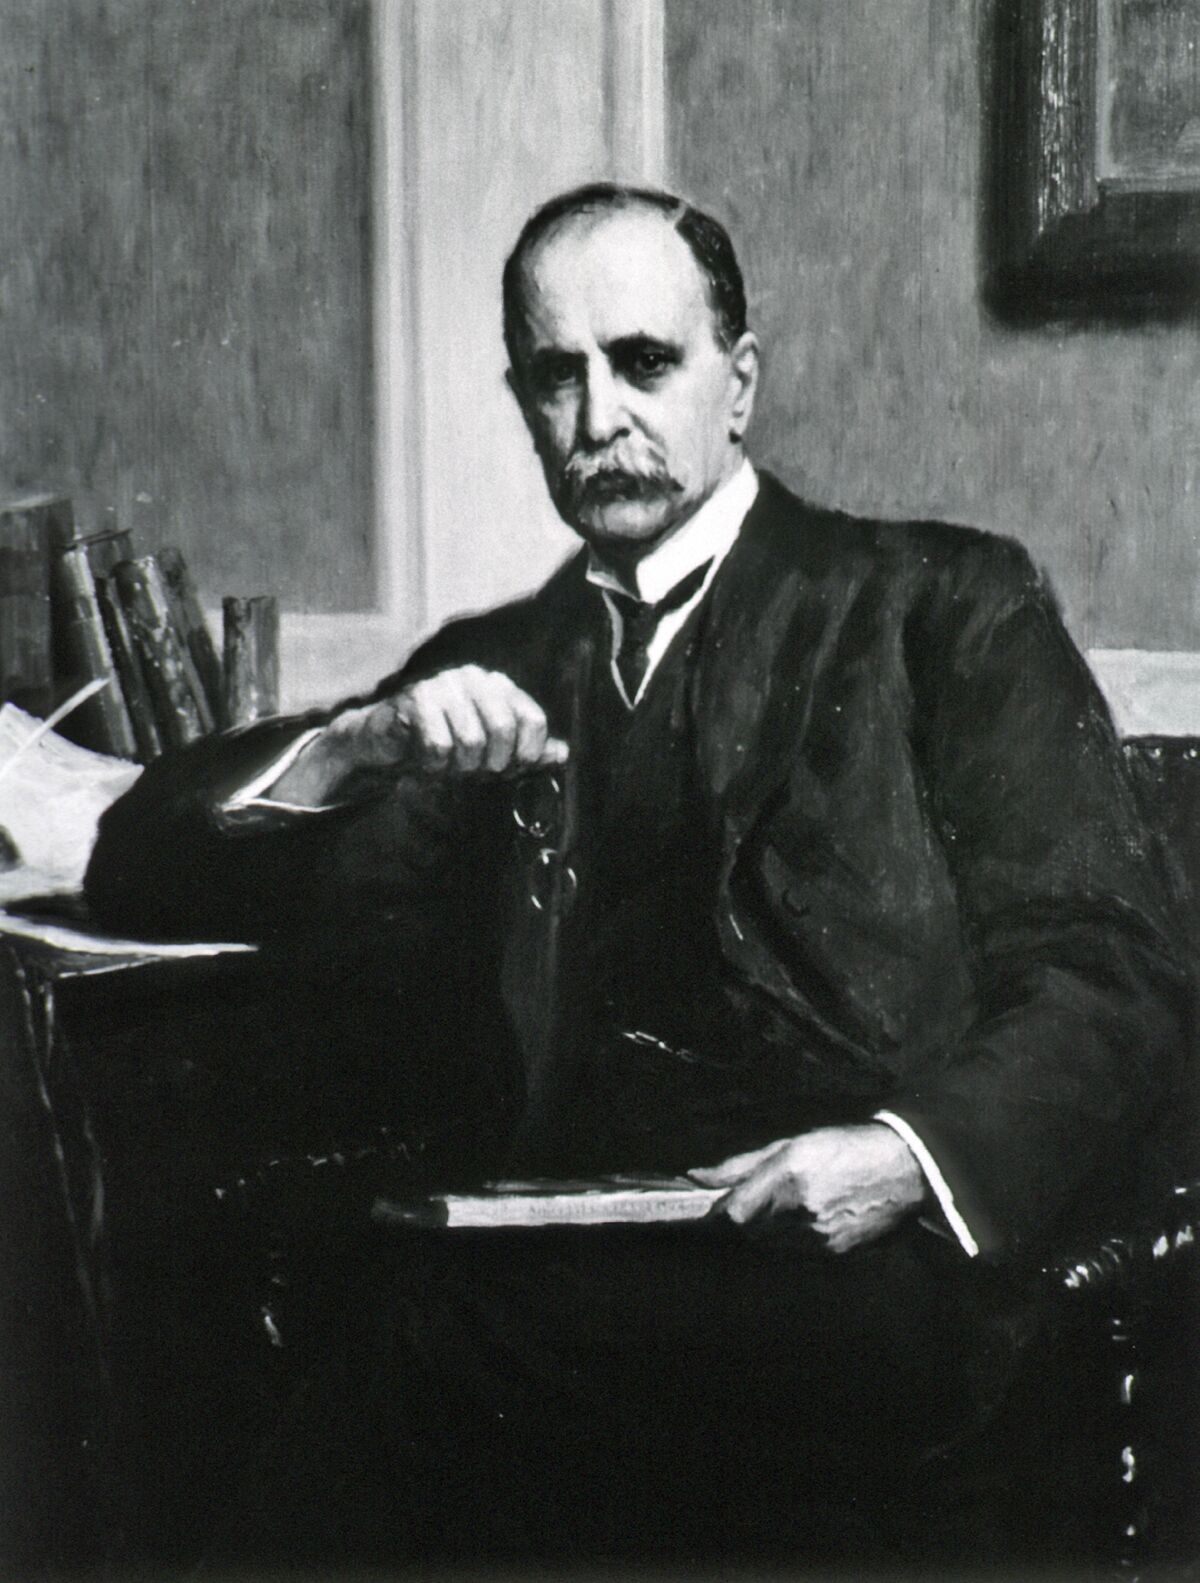 Dr. William Osler was one of the founding professors of the Johns Hopkins University medical school.